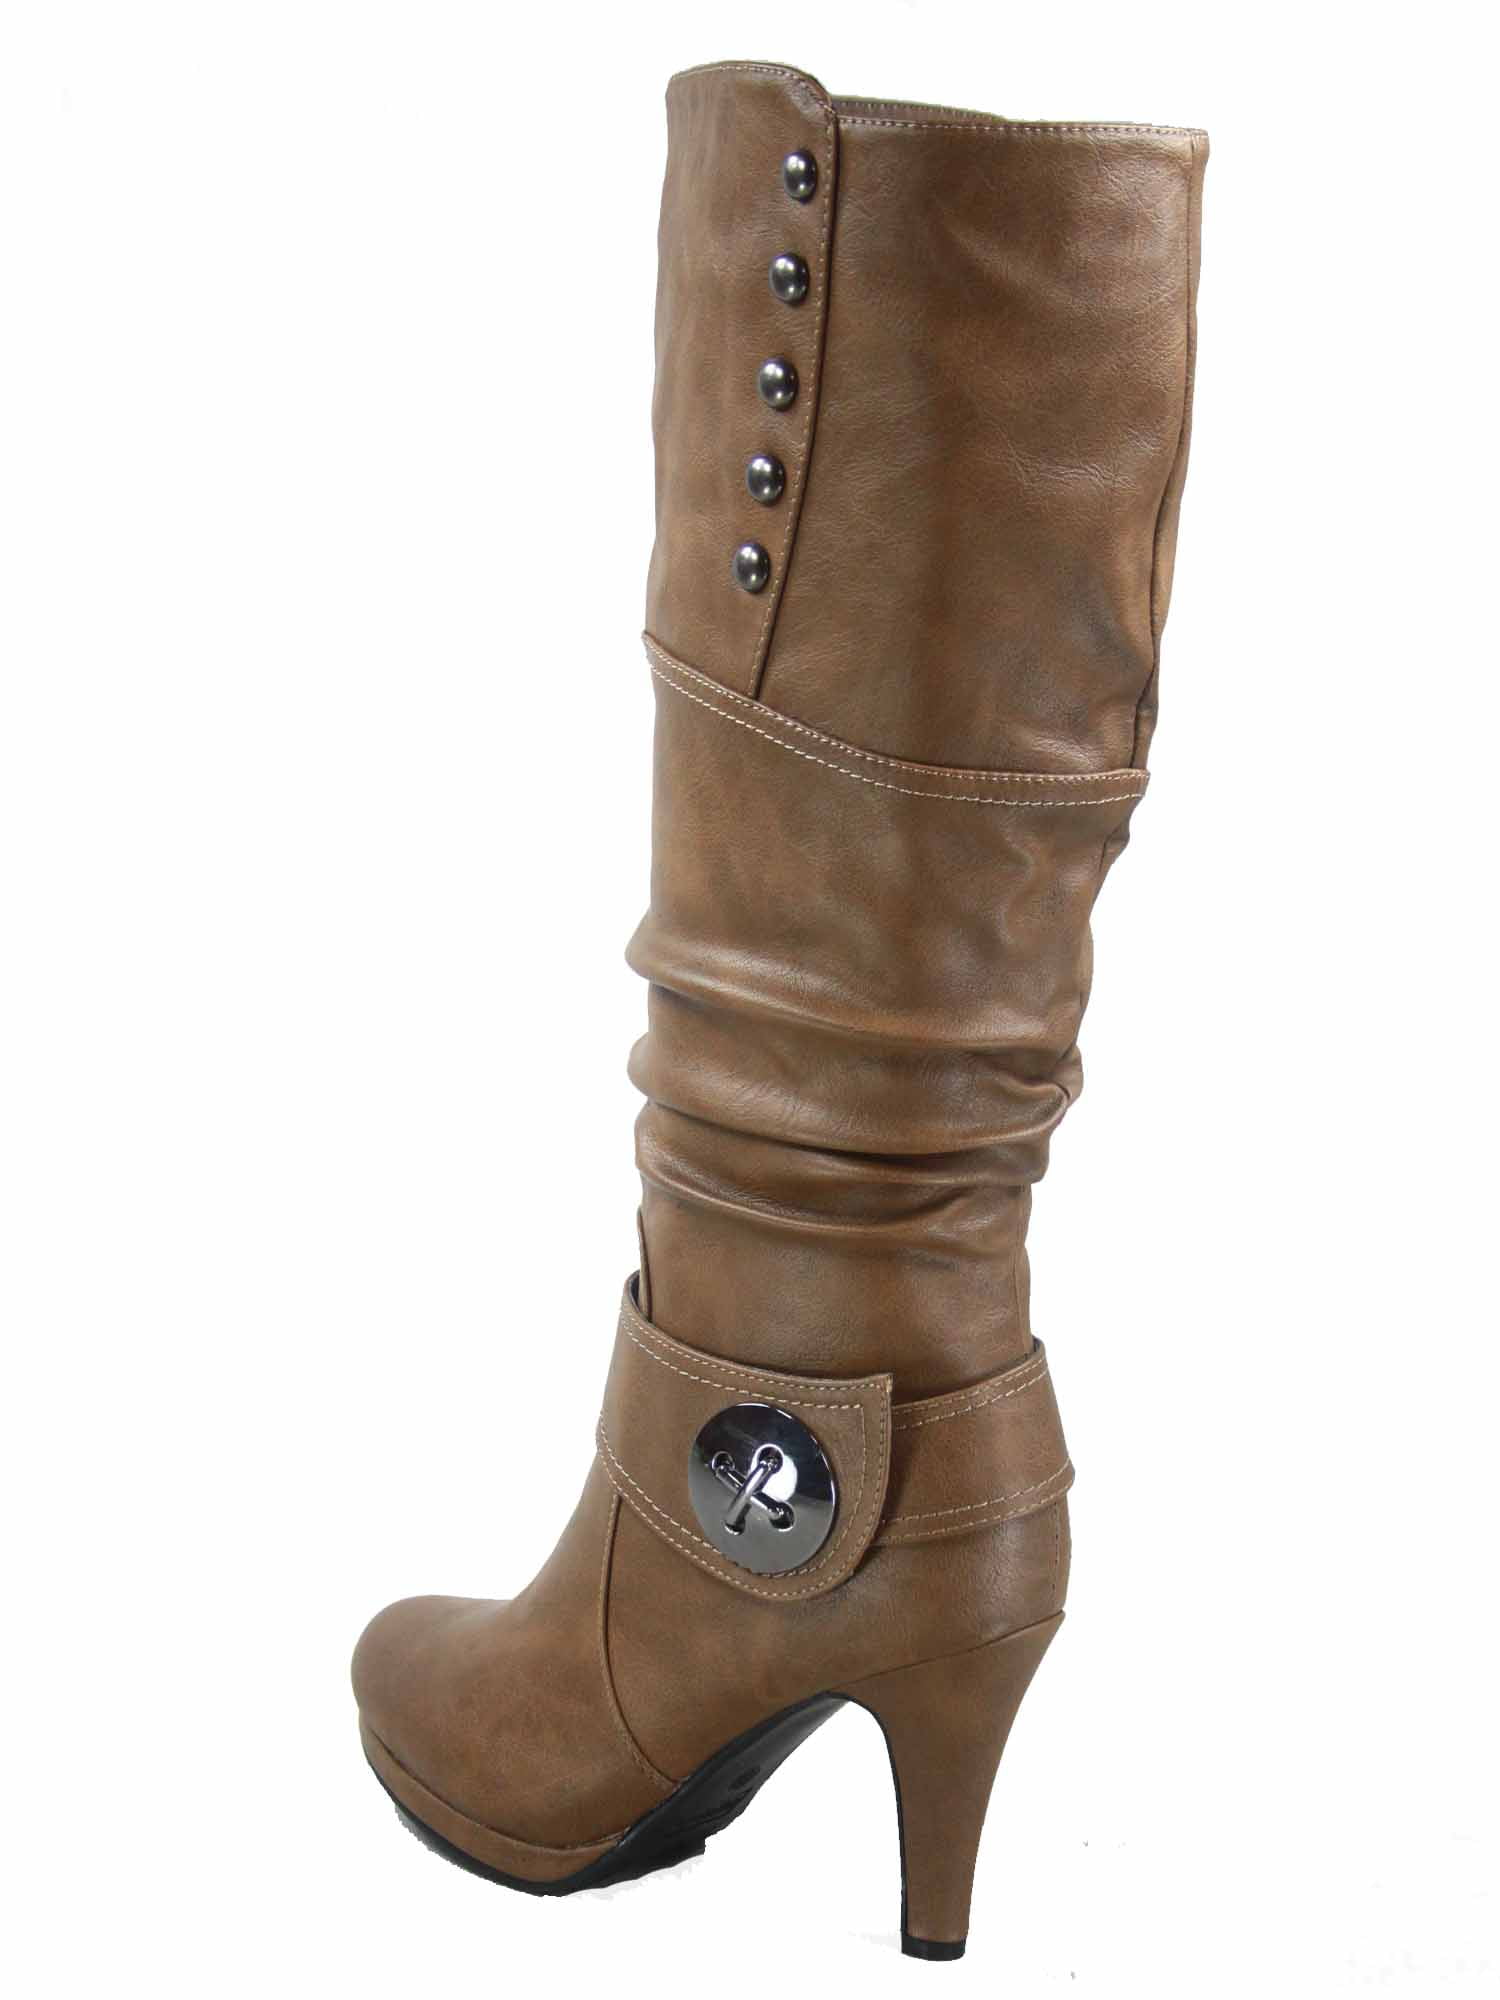 Cognac Brown Faux Leather Over the Knee High w Buckle Strap Zipper Riding Boots 